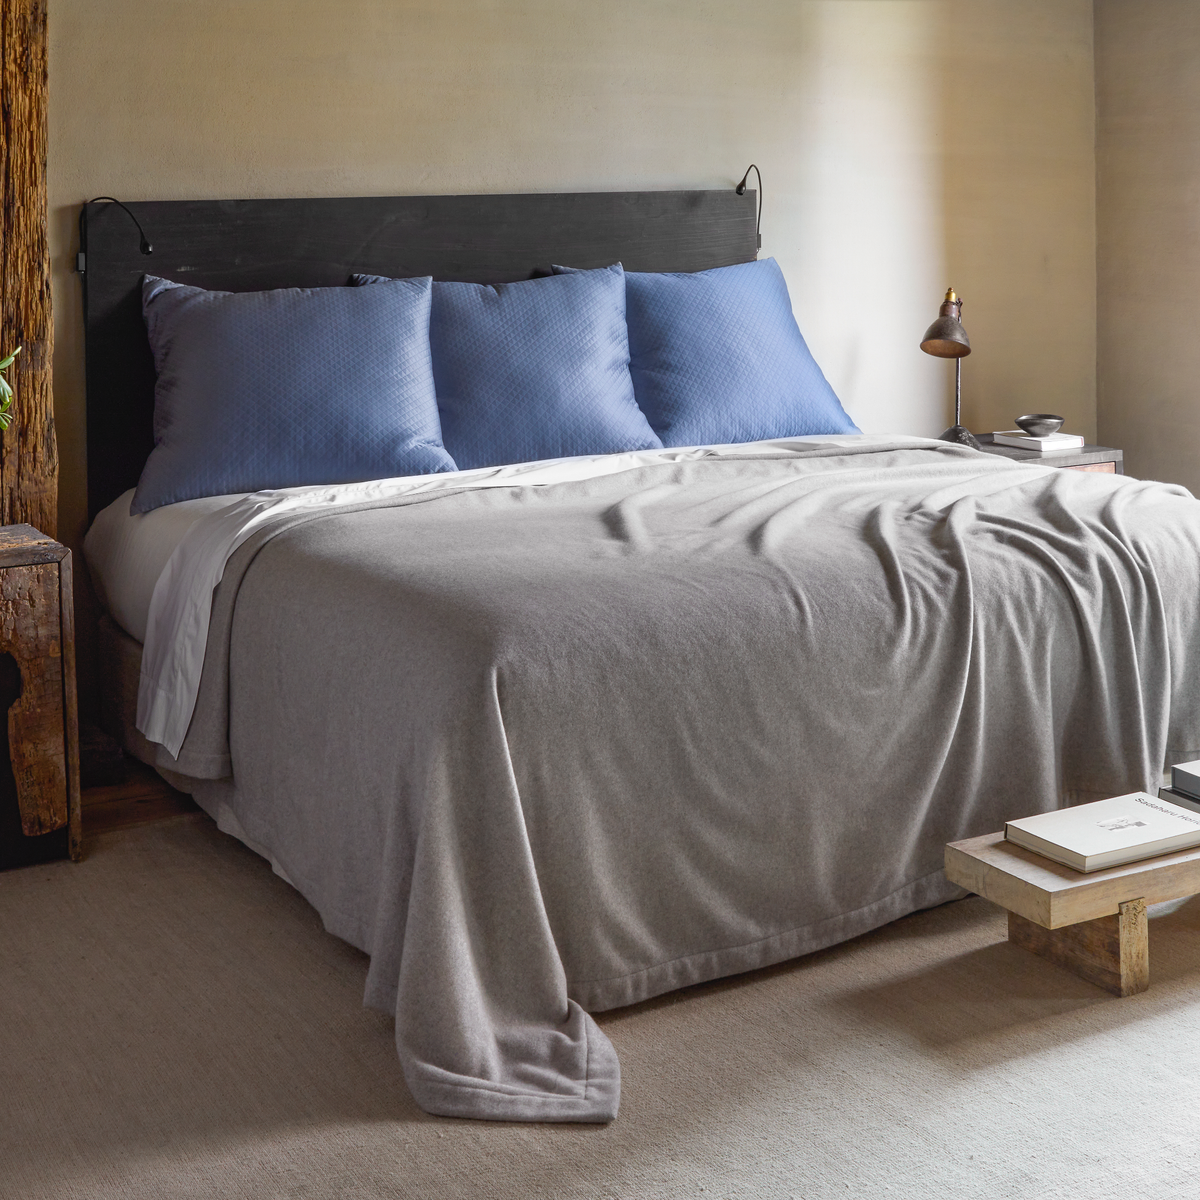 Lifestyle Full Bedding of Matouk Venus Collection in Pearl Grey Color